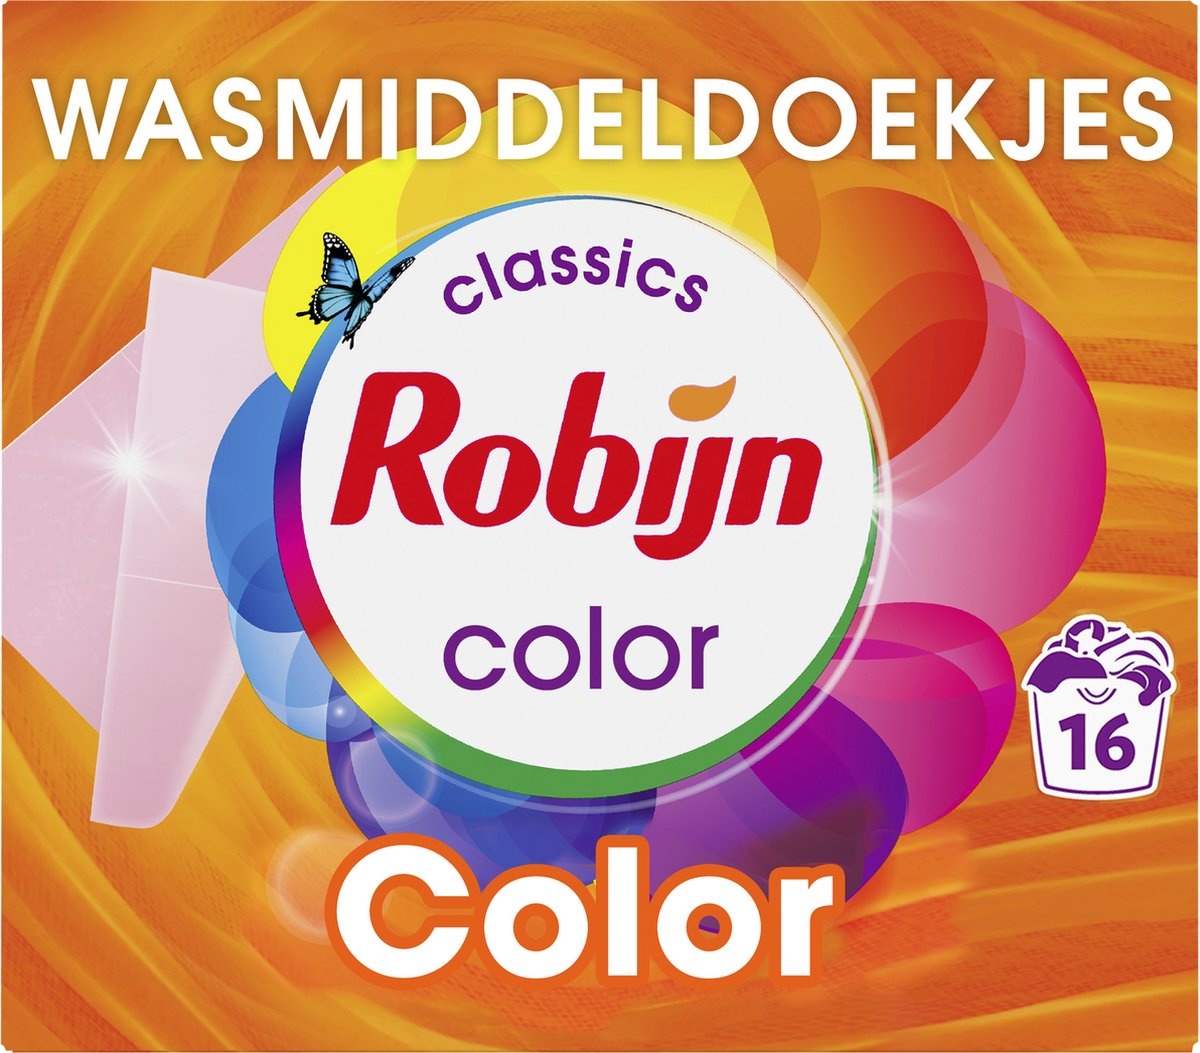 Robijn Classics Color Detergent Wipes 16 wax strips - Packaging damaged